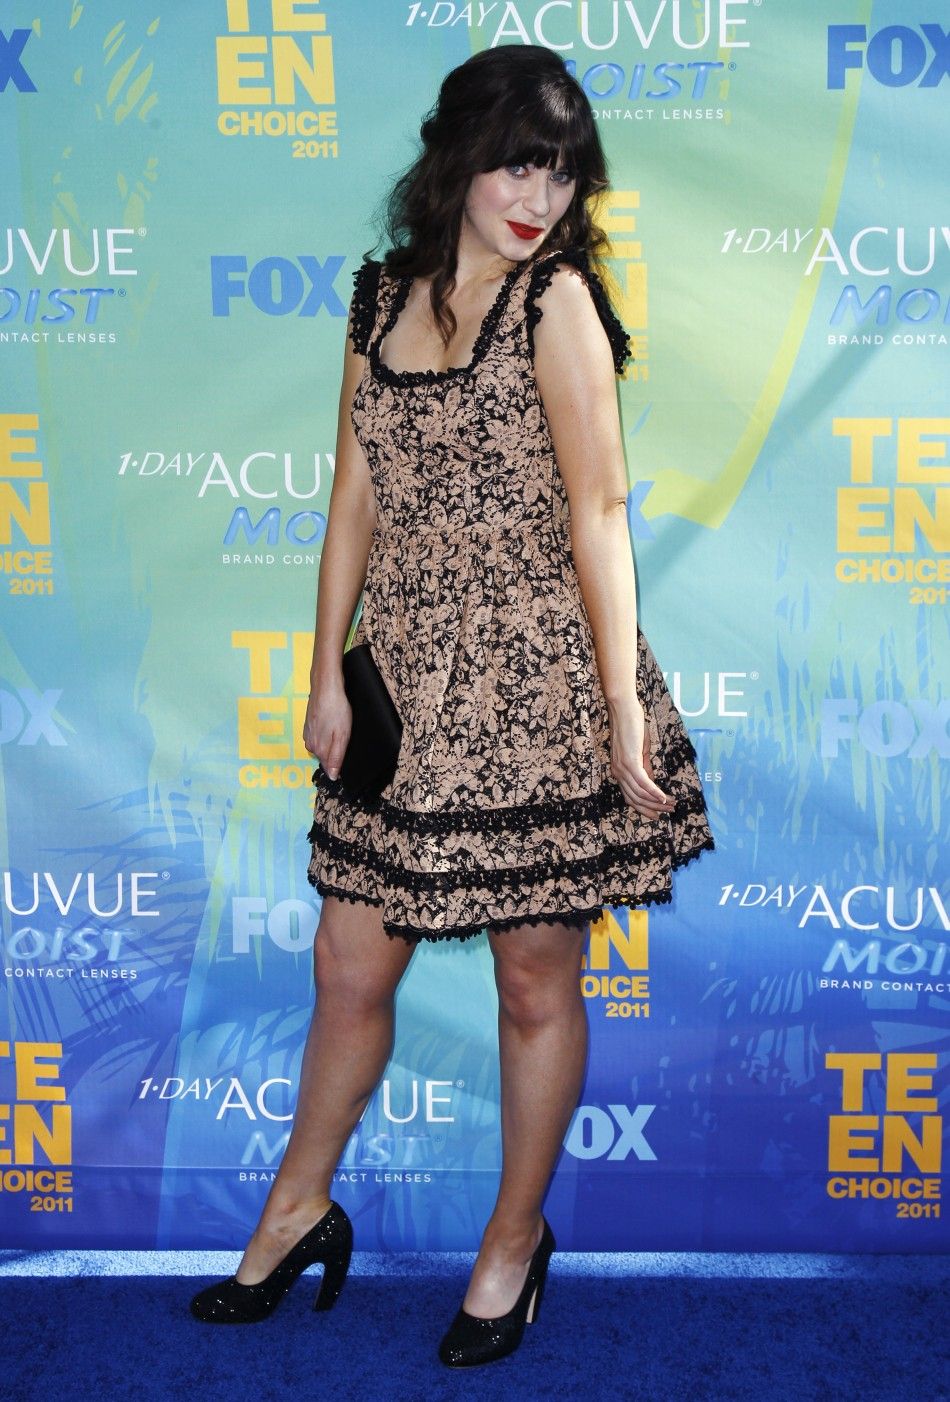 Actress Deschanel arrives at the Teen Choice Awards in Los Angeles